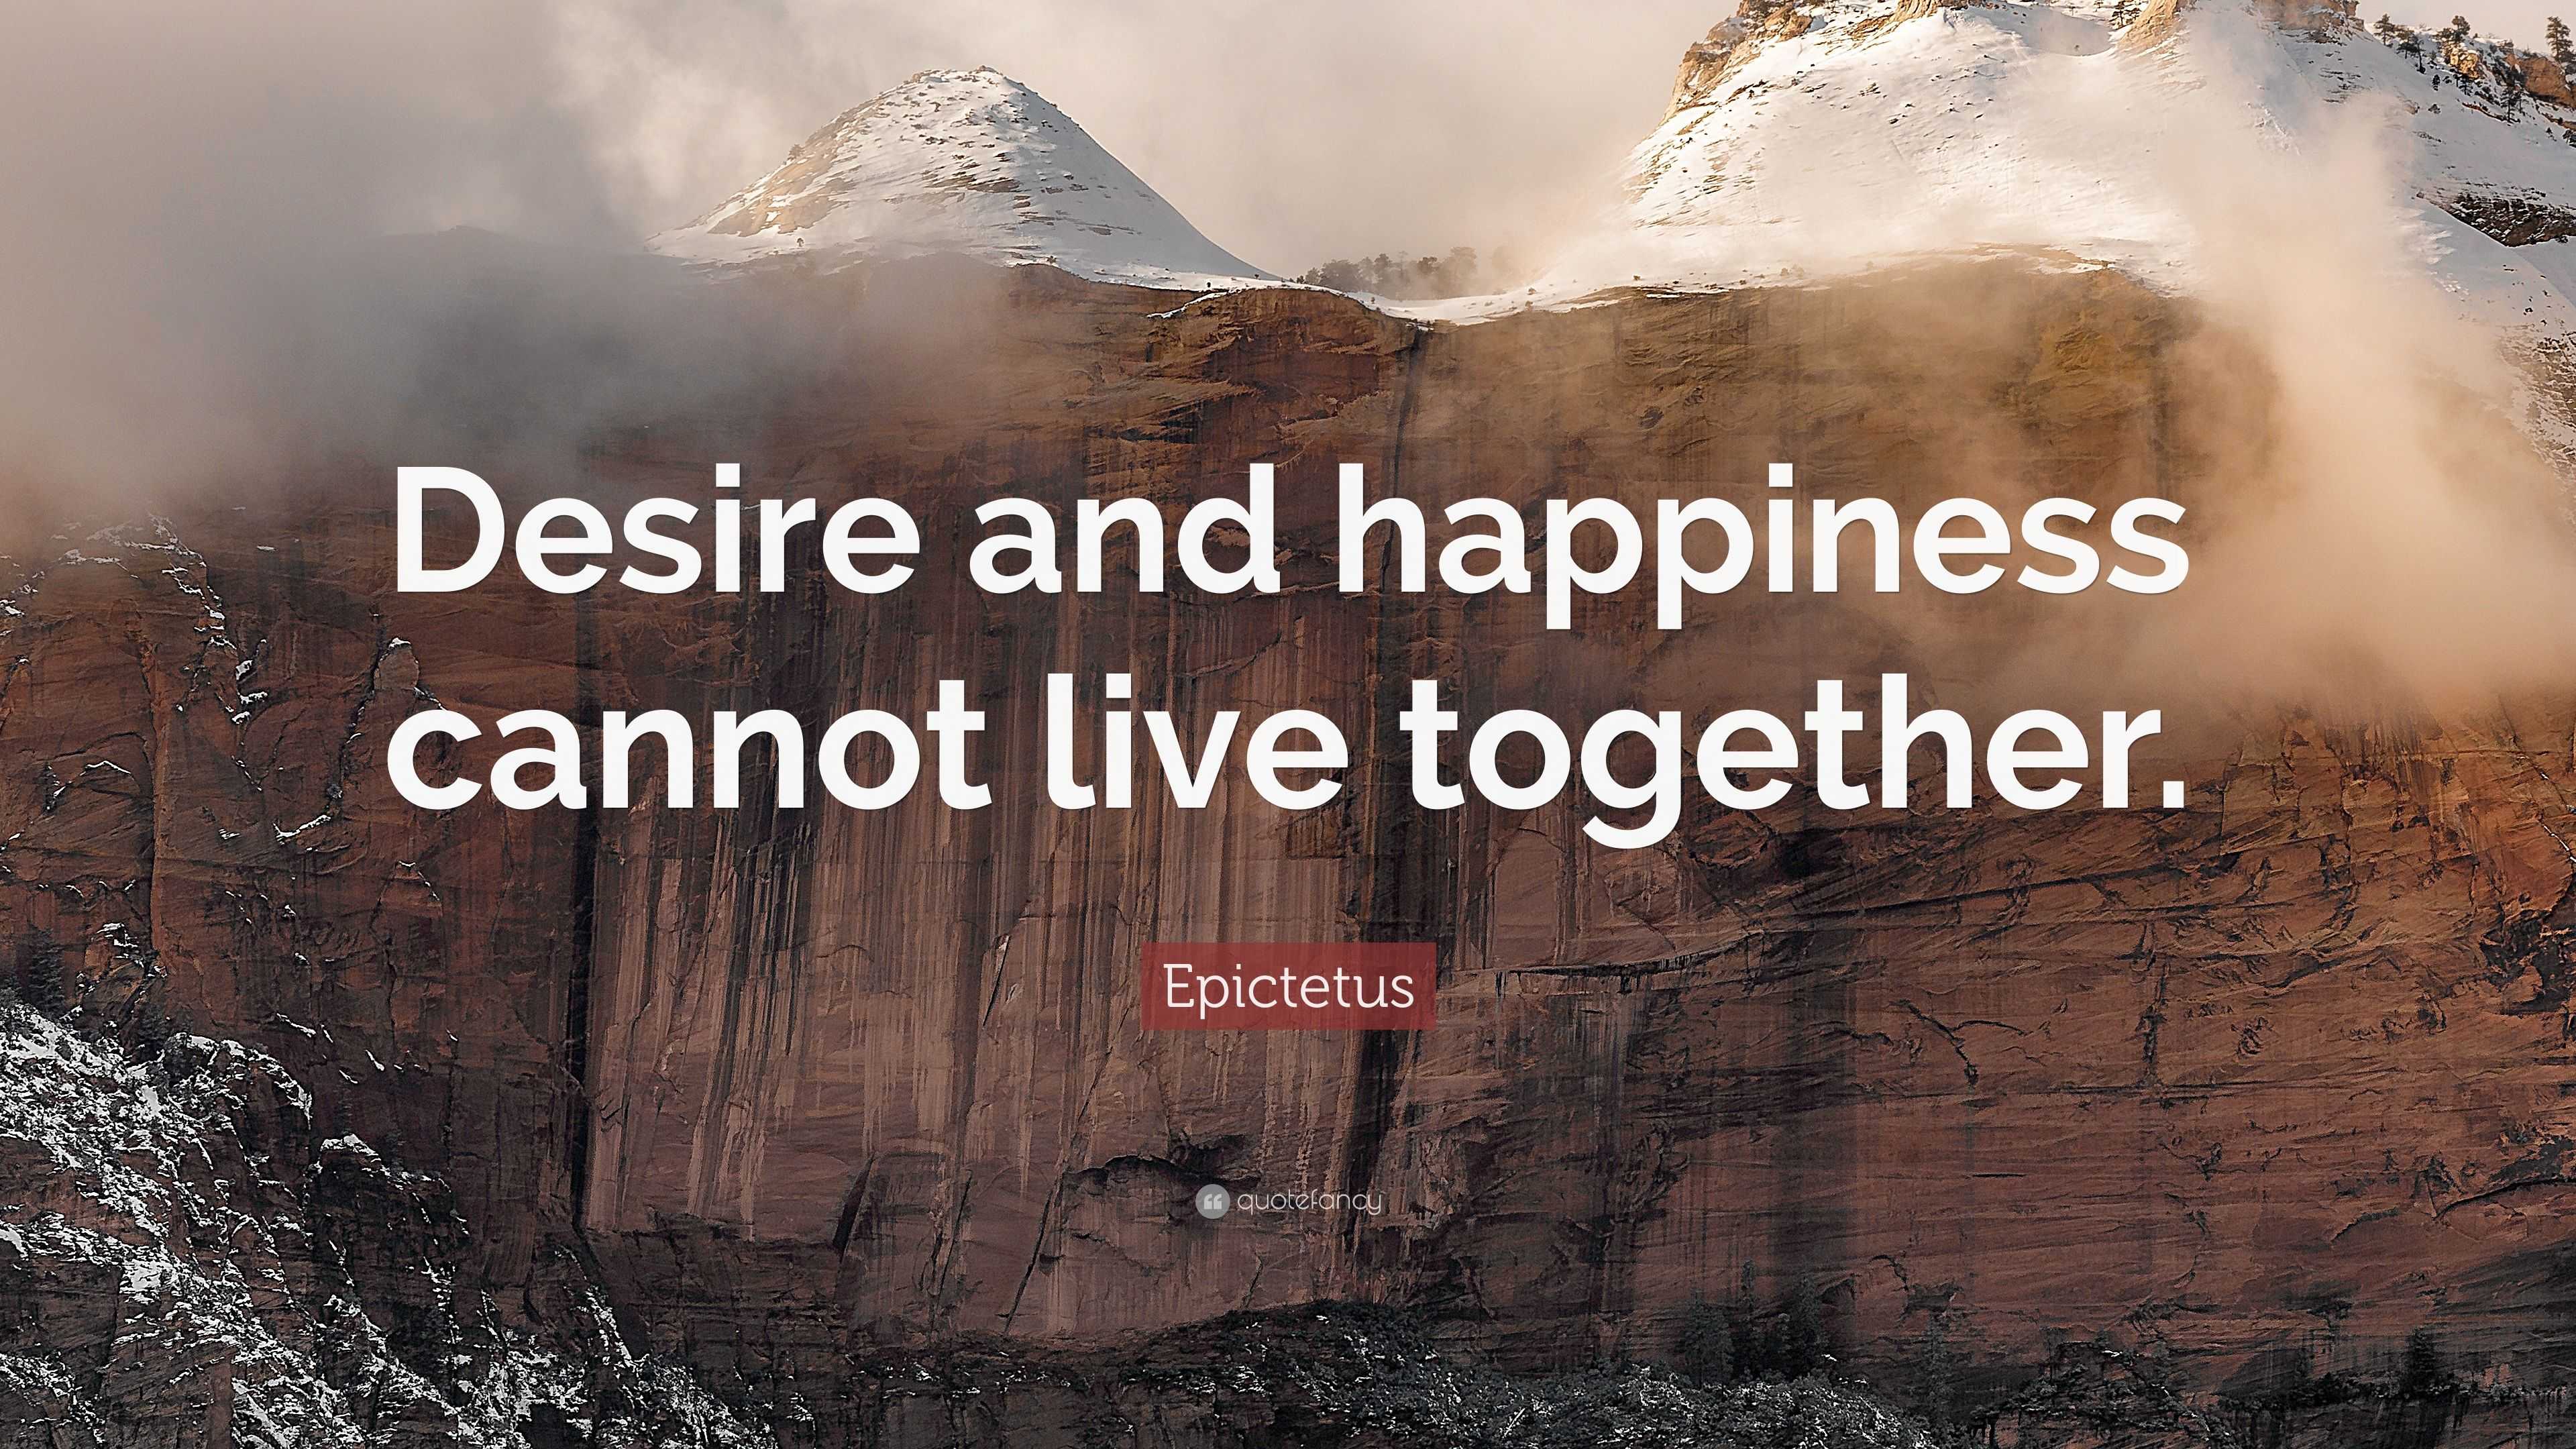 Epictetus Quote: “Desire and happiness cannot live together.”